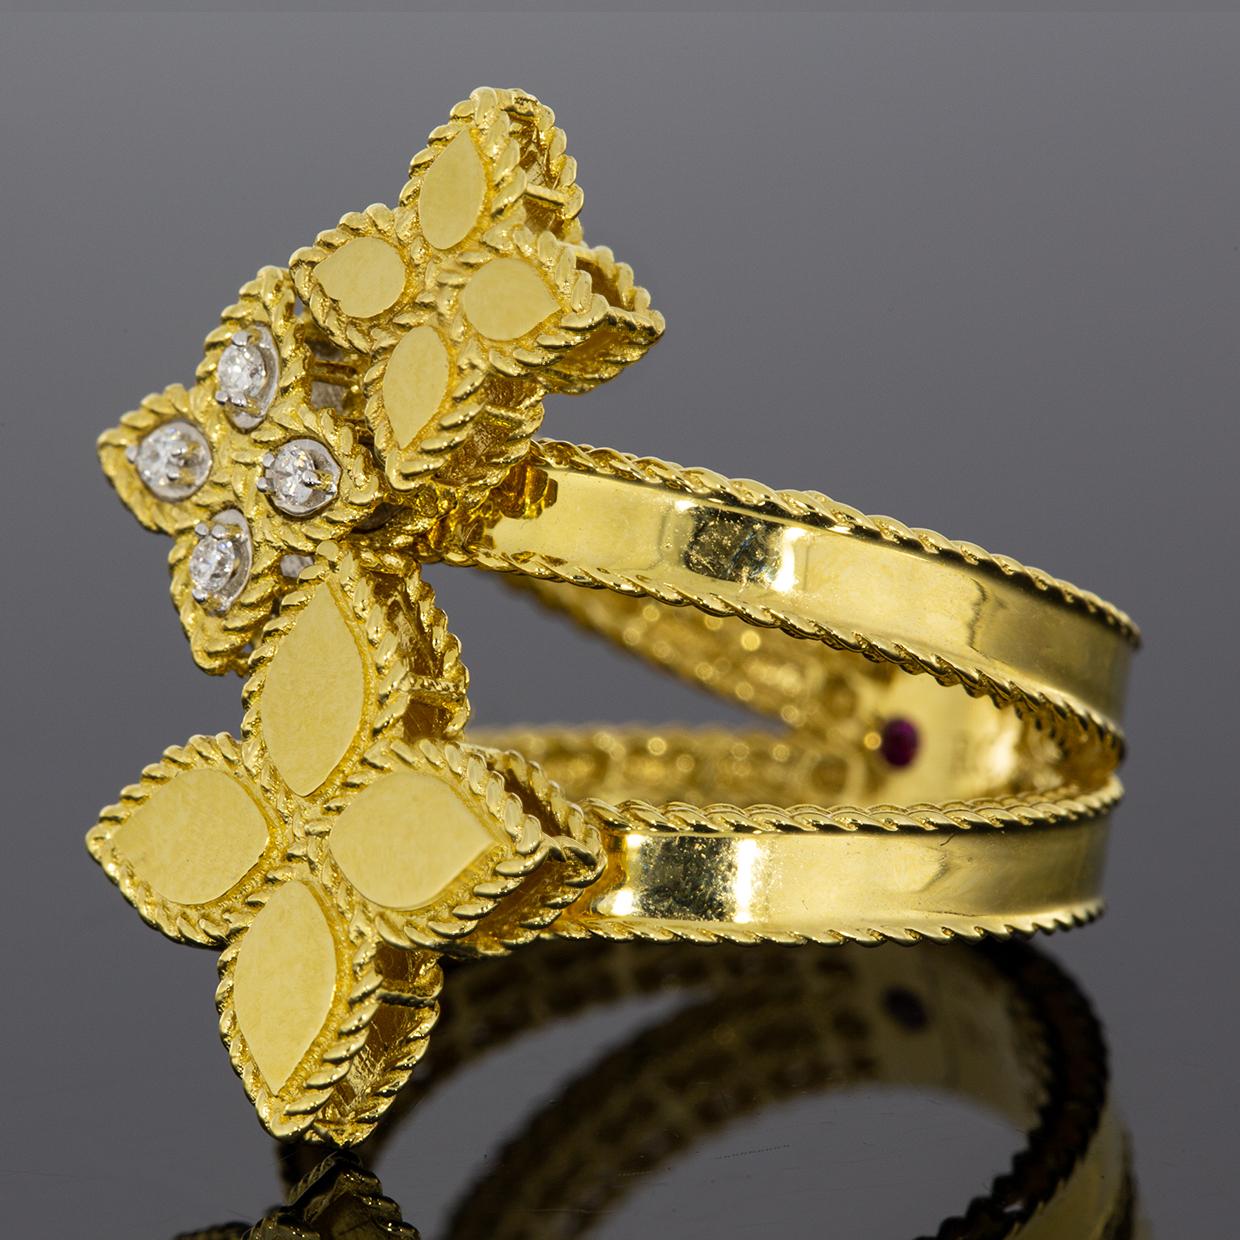 Item Details
Estimated Retail $2,250.00
Brand Roberto Coin
Collection Princess Flower
Metal Multi-tone Gold
Total Carat Weight (TCW) 0.03 ctw
Ring Size 6.5
Sizable No
Width 6 mm
Metal Purity 18k
Style Statement

Roberto Coin founded his namesake